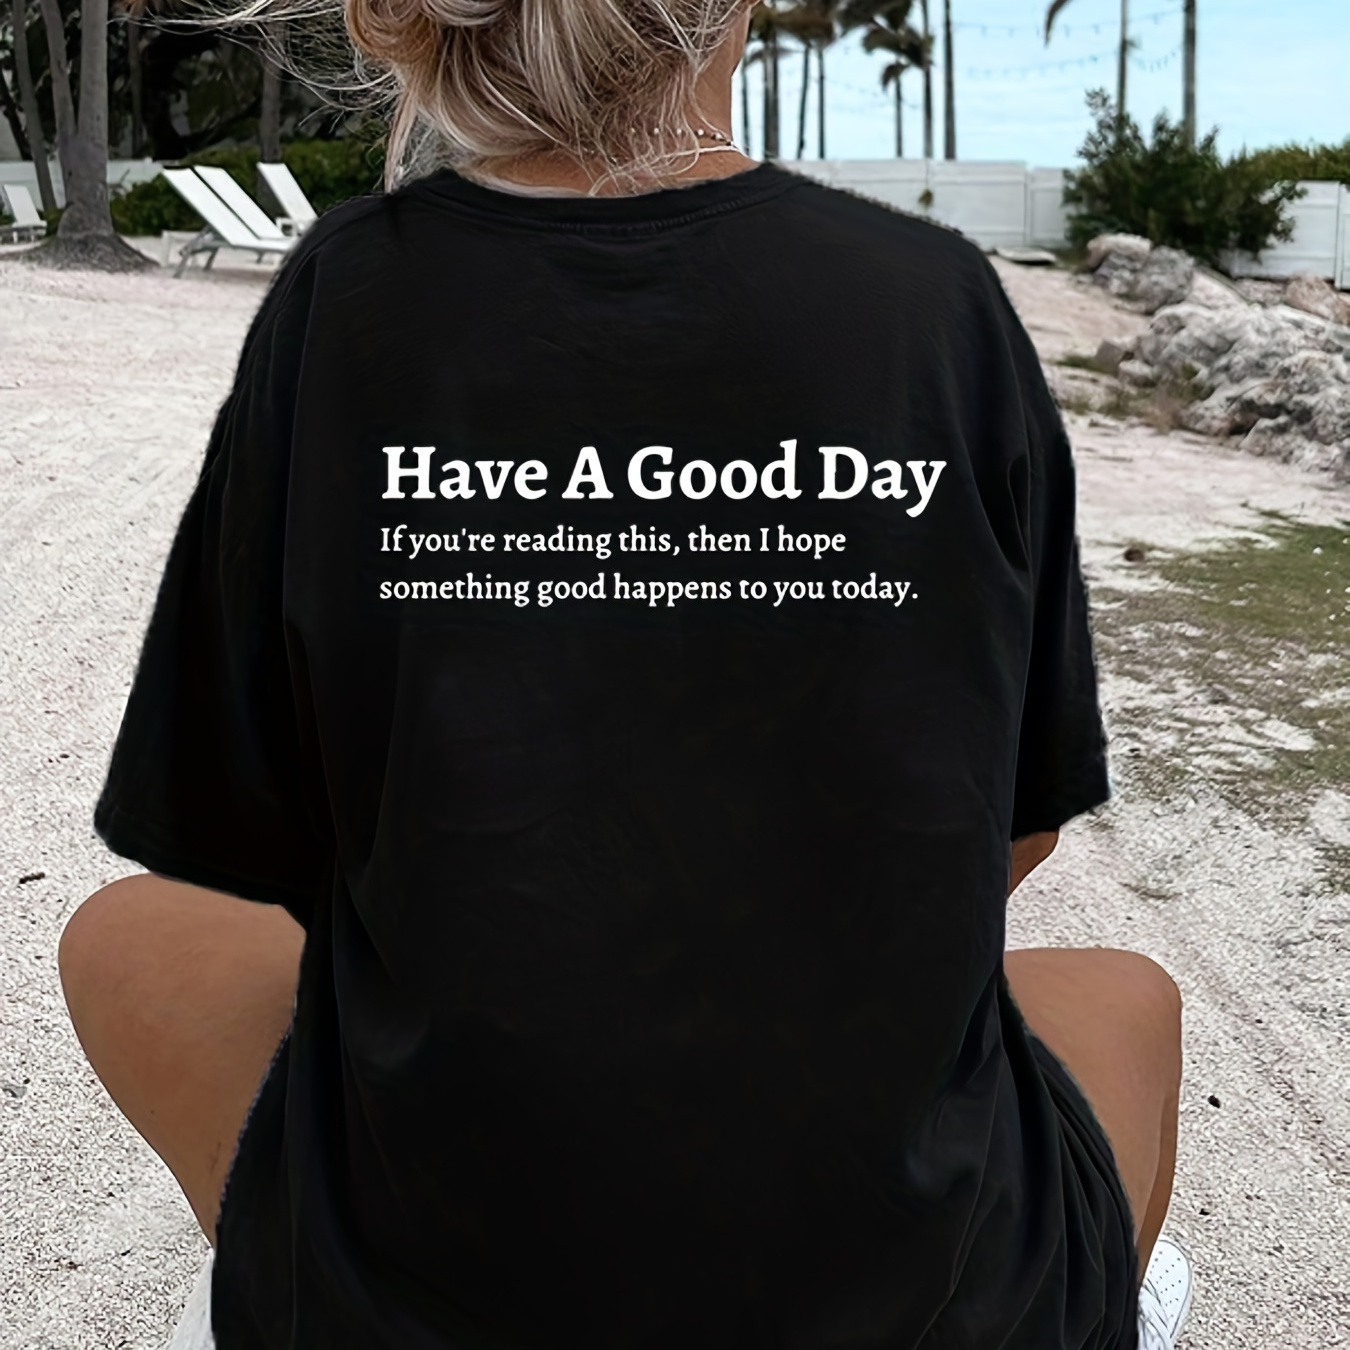 

Have A Nice Day Print T-shirt, Short Sleeve Crew Neck Casual Top For Summer, Women's Clothing